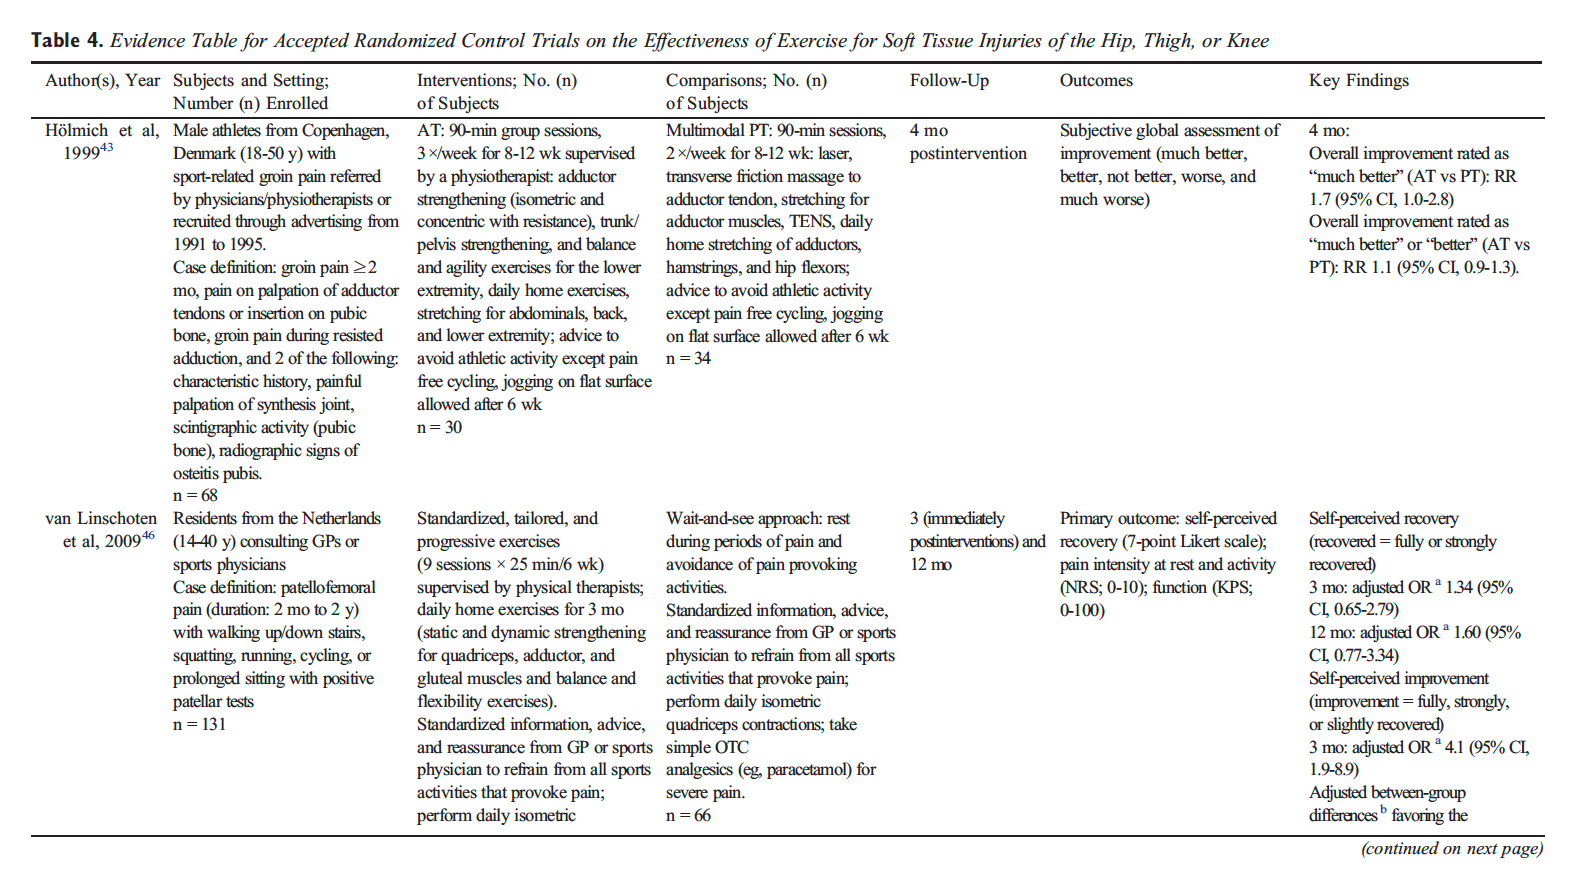 Table 4 Evidence Table for Accepted Randomized Control Trials on the Effectiveness of Exercise for Soft Tissue Injuries of the Hip, Thigh, or Knee